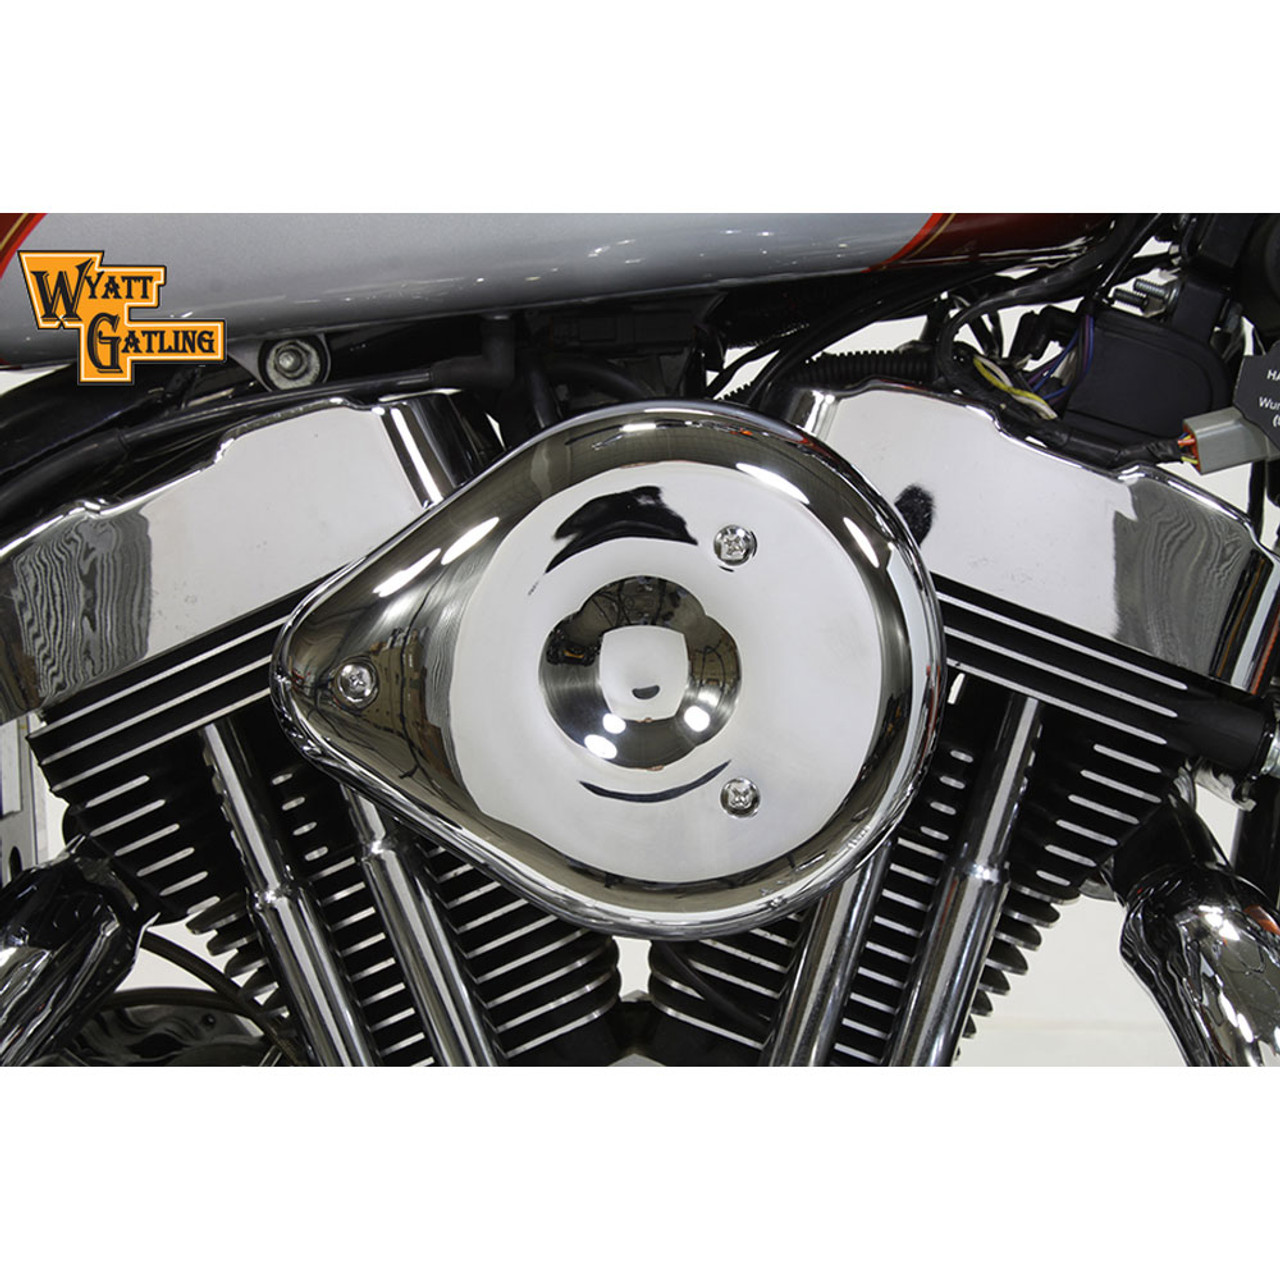 Chrome Tear Drop Air Cleaner for Harley Davidson by V-Twin